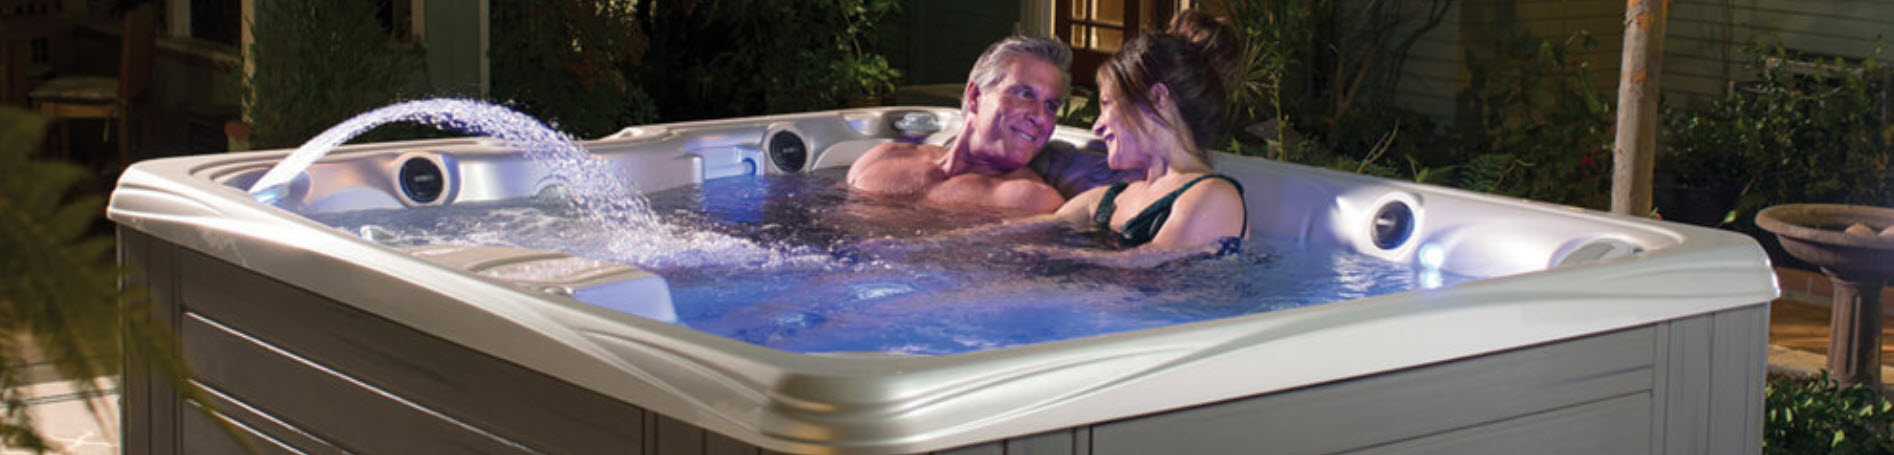 Plan the Perfect Stay-cation With a Spa at Home, Hot Tubs Hatfield MN